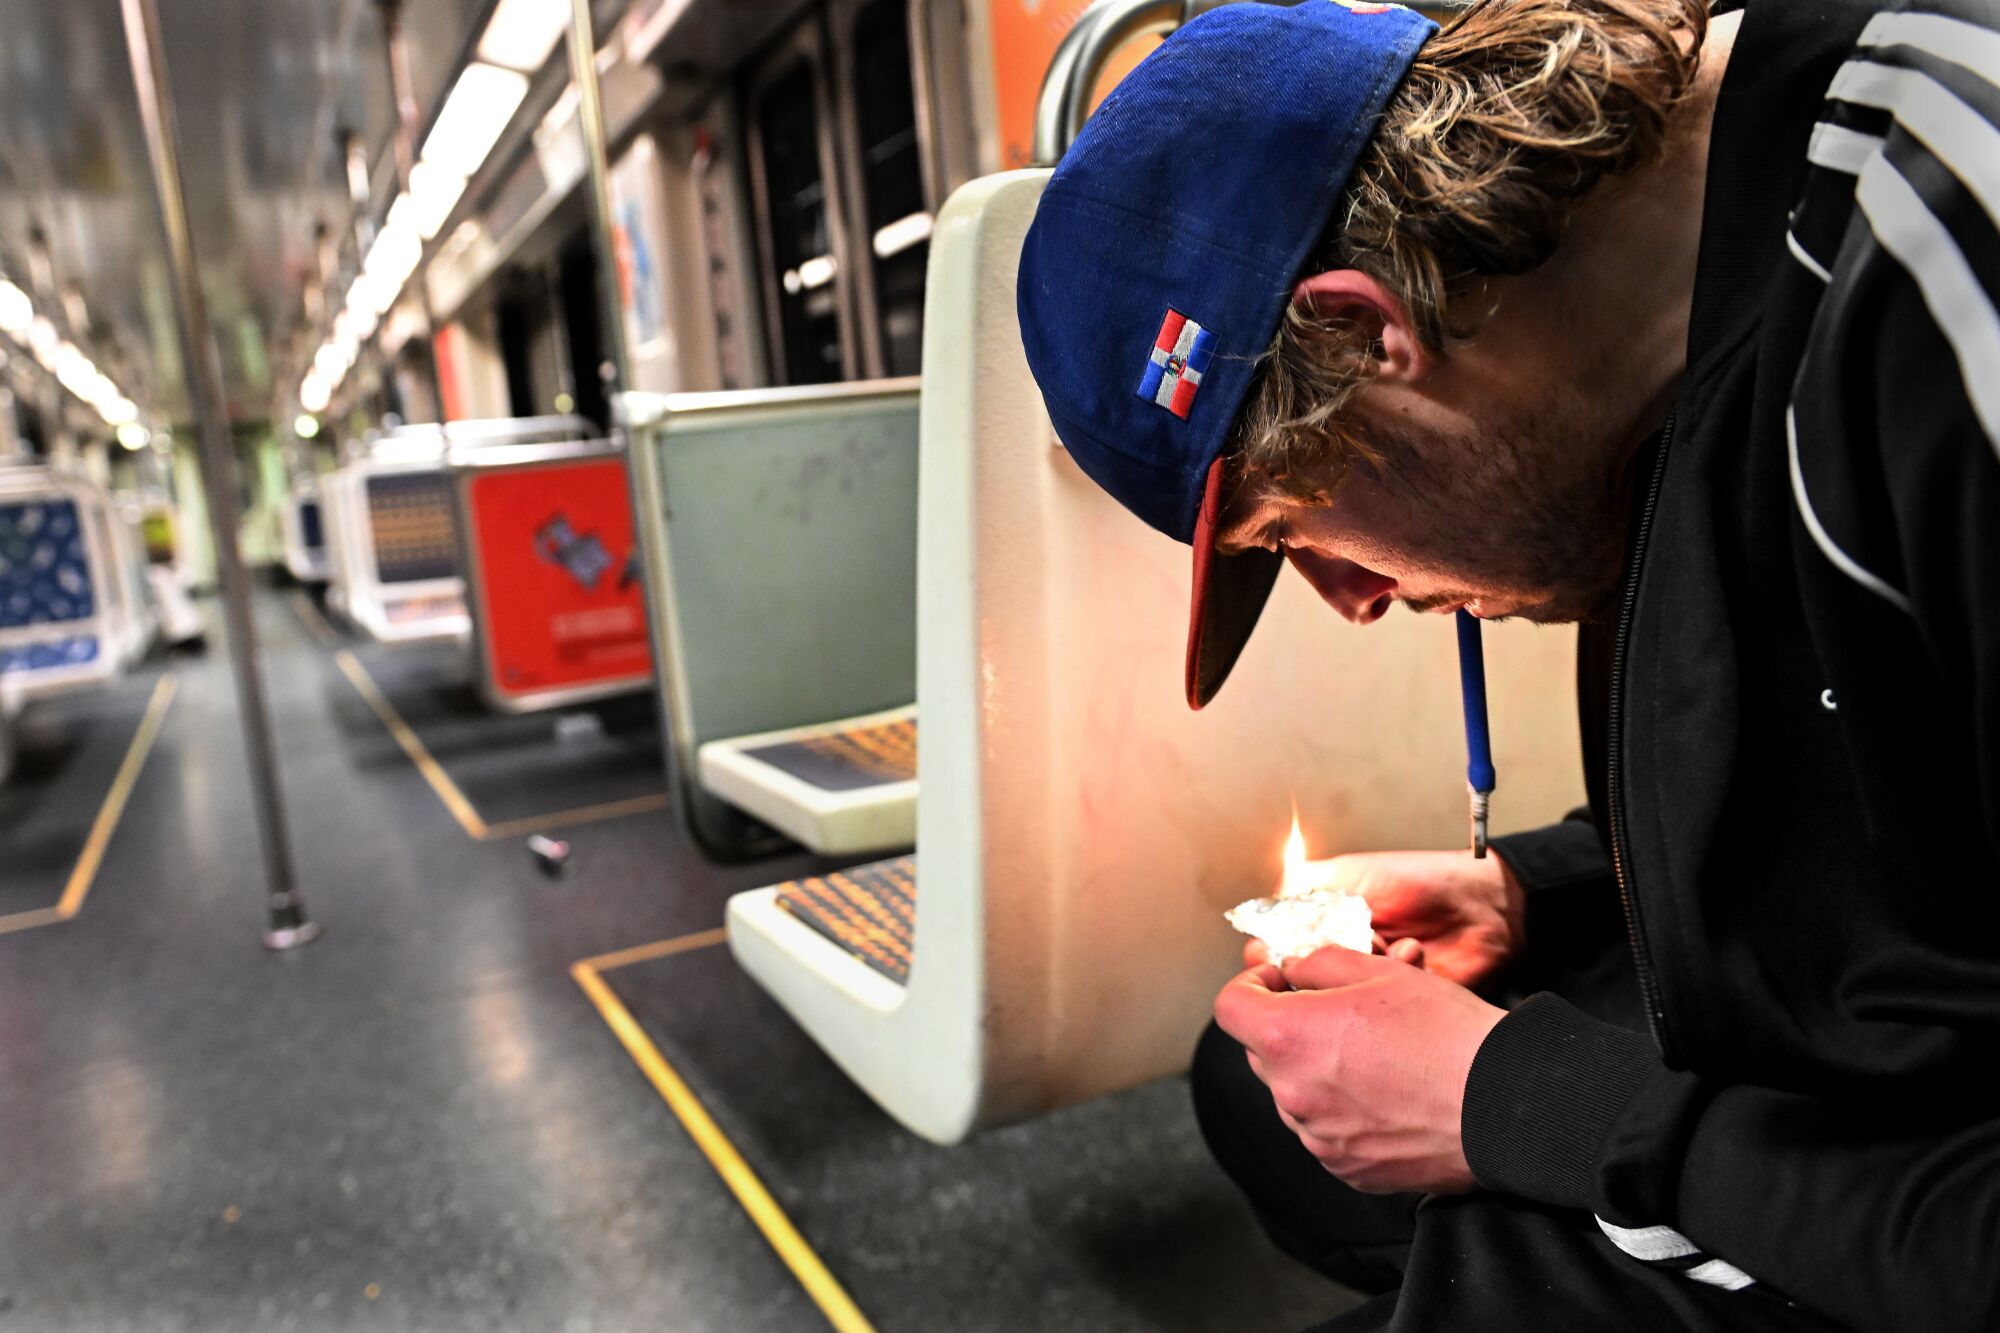 Seated in a subway train, a young man with dark blond hair and a baseball cap smokes a substance off of an aluminum foil.